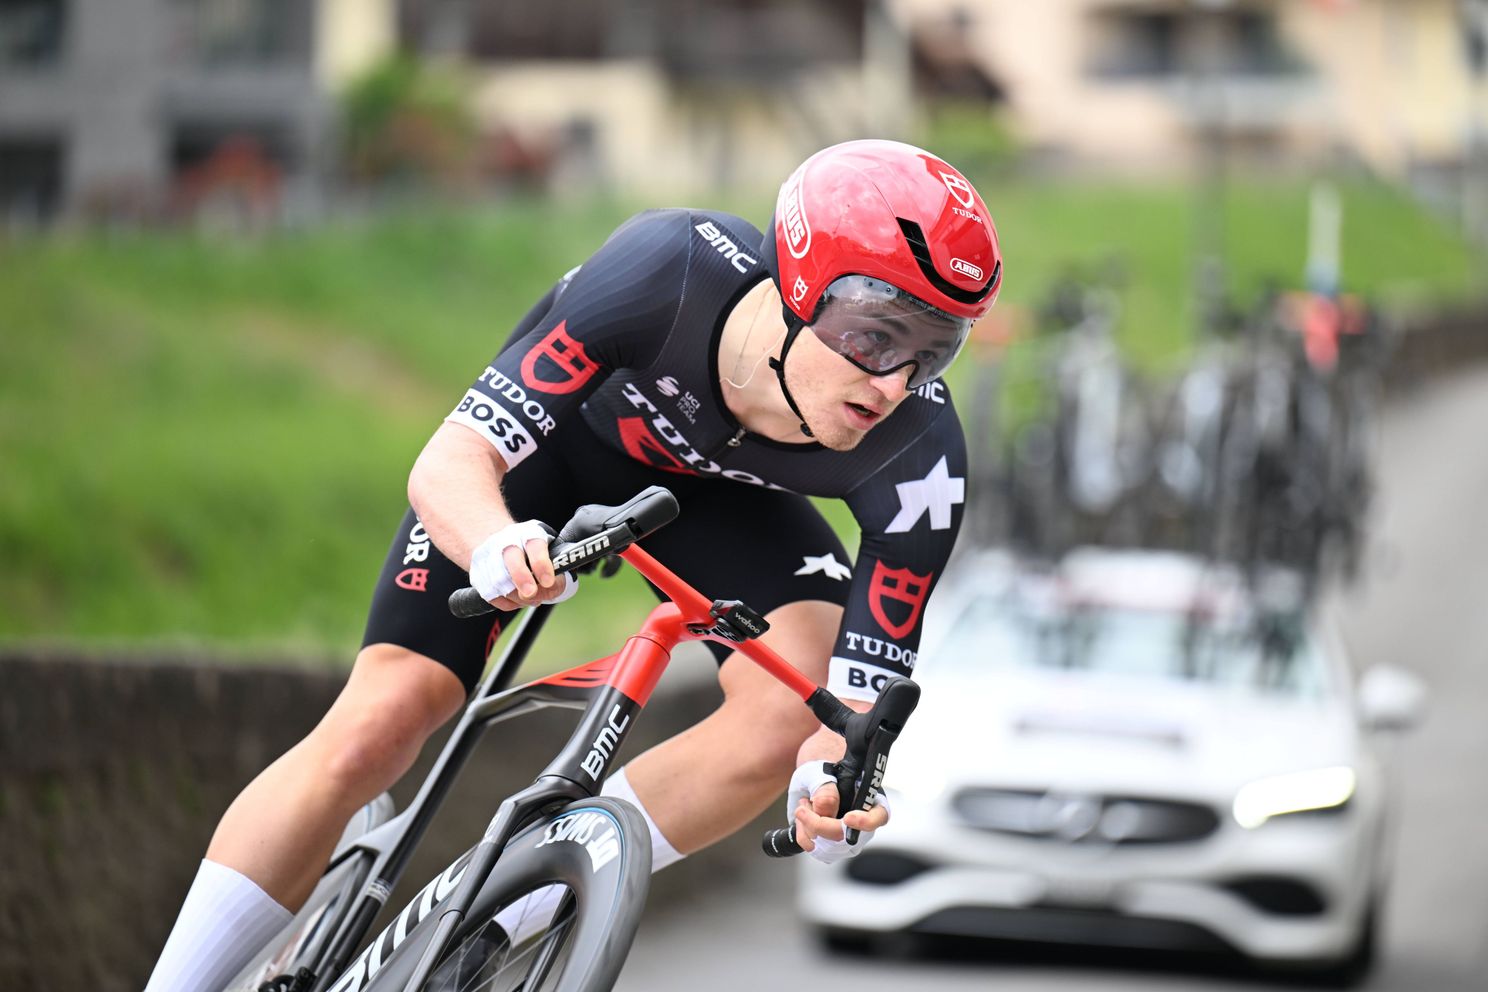 Tudor Project Cancellara further solidifies towards Giro: "lots of compliments within the peloton" from Van Aert and co